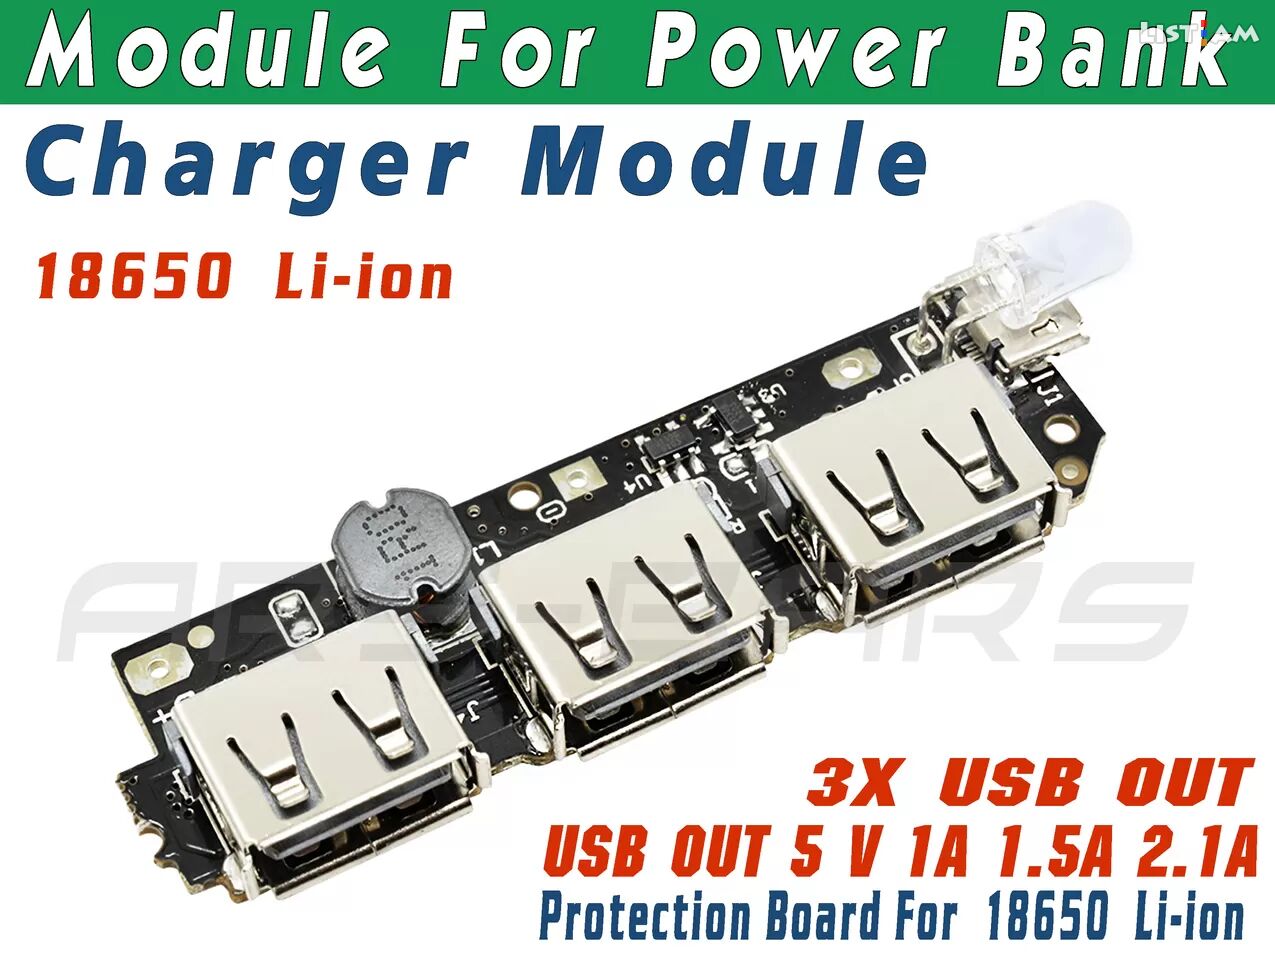 Module For Power